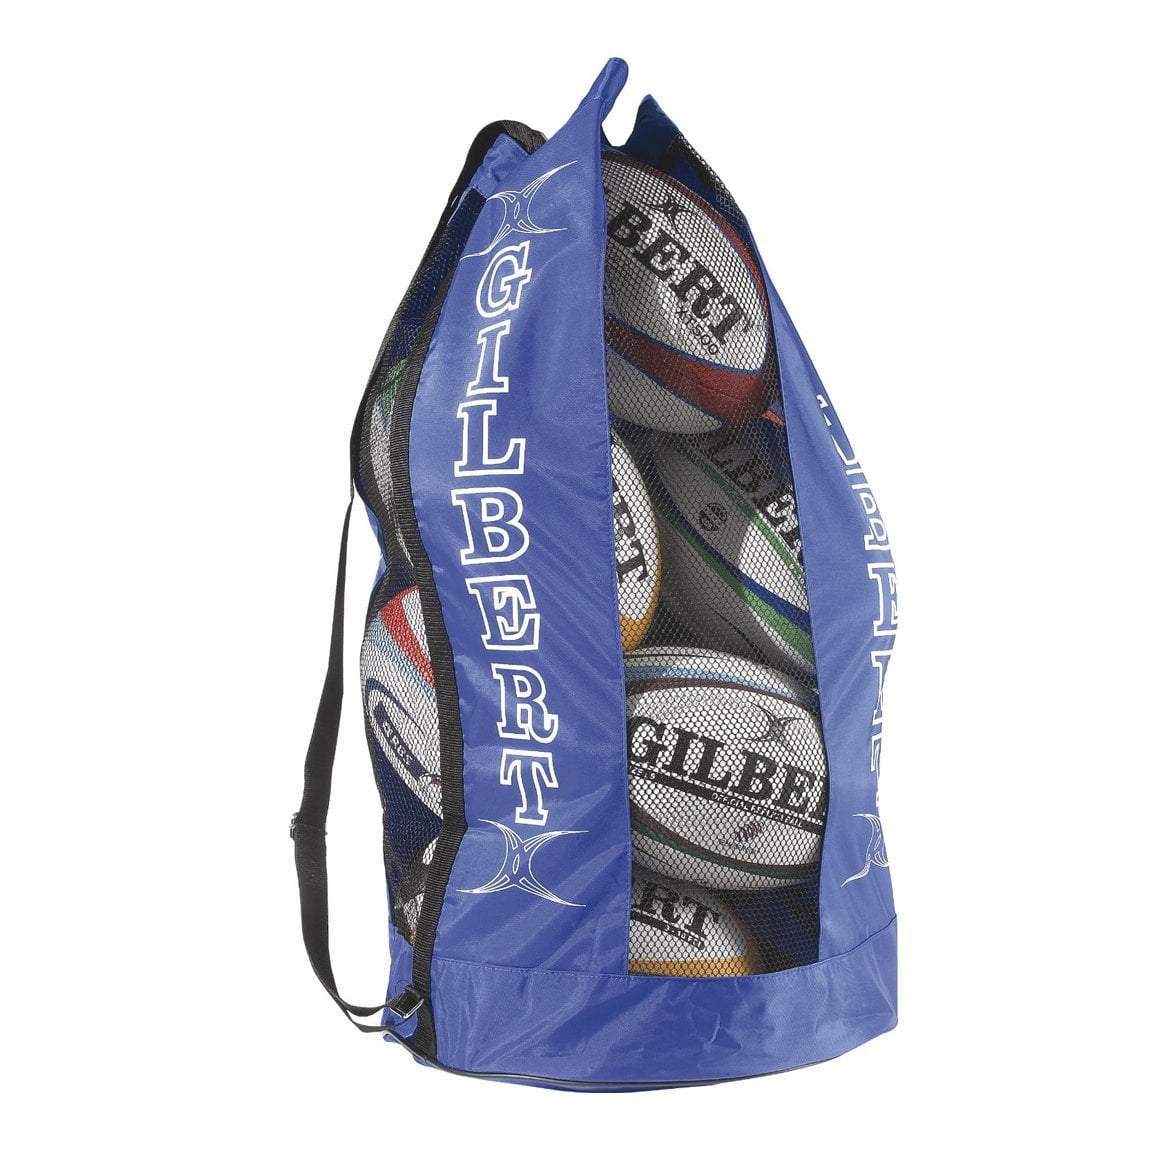 Rugby Bags and Luggage Tagged gilbert - Rugby Imports